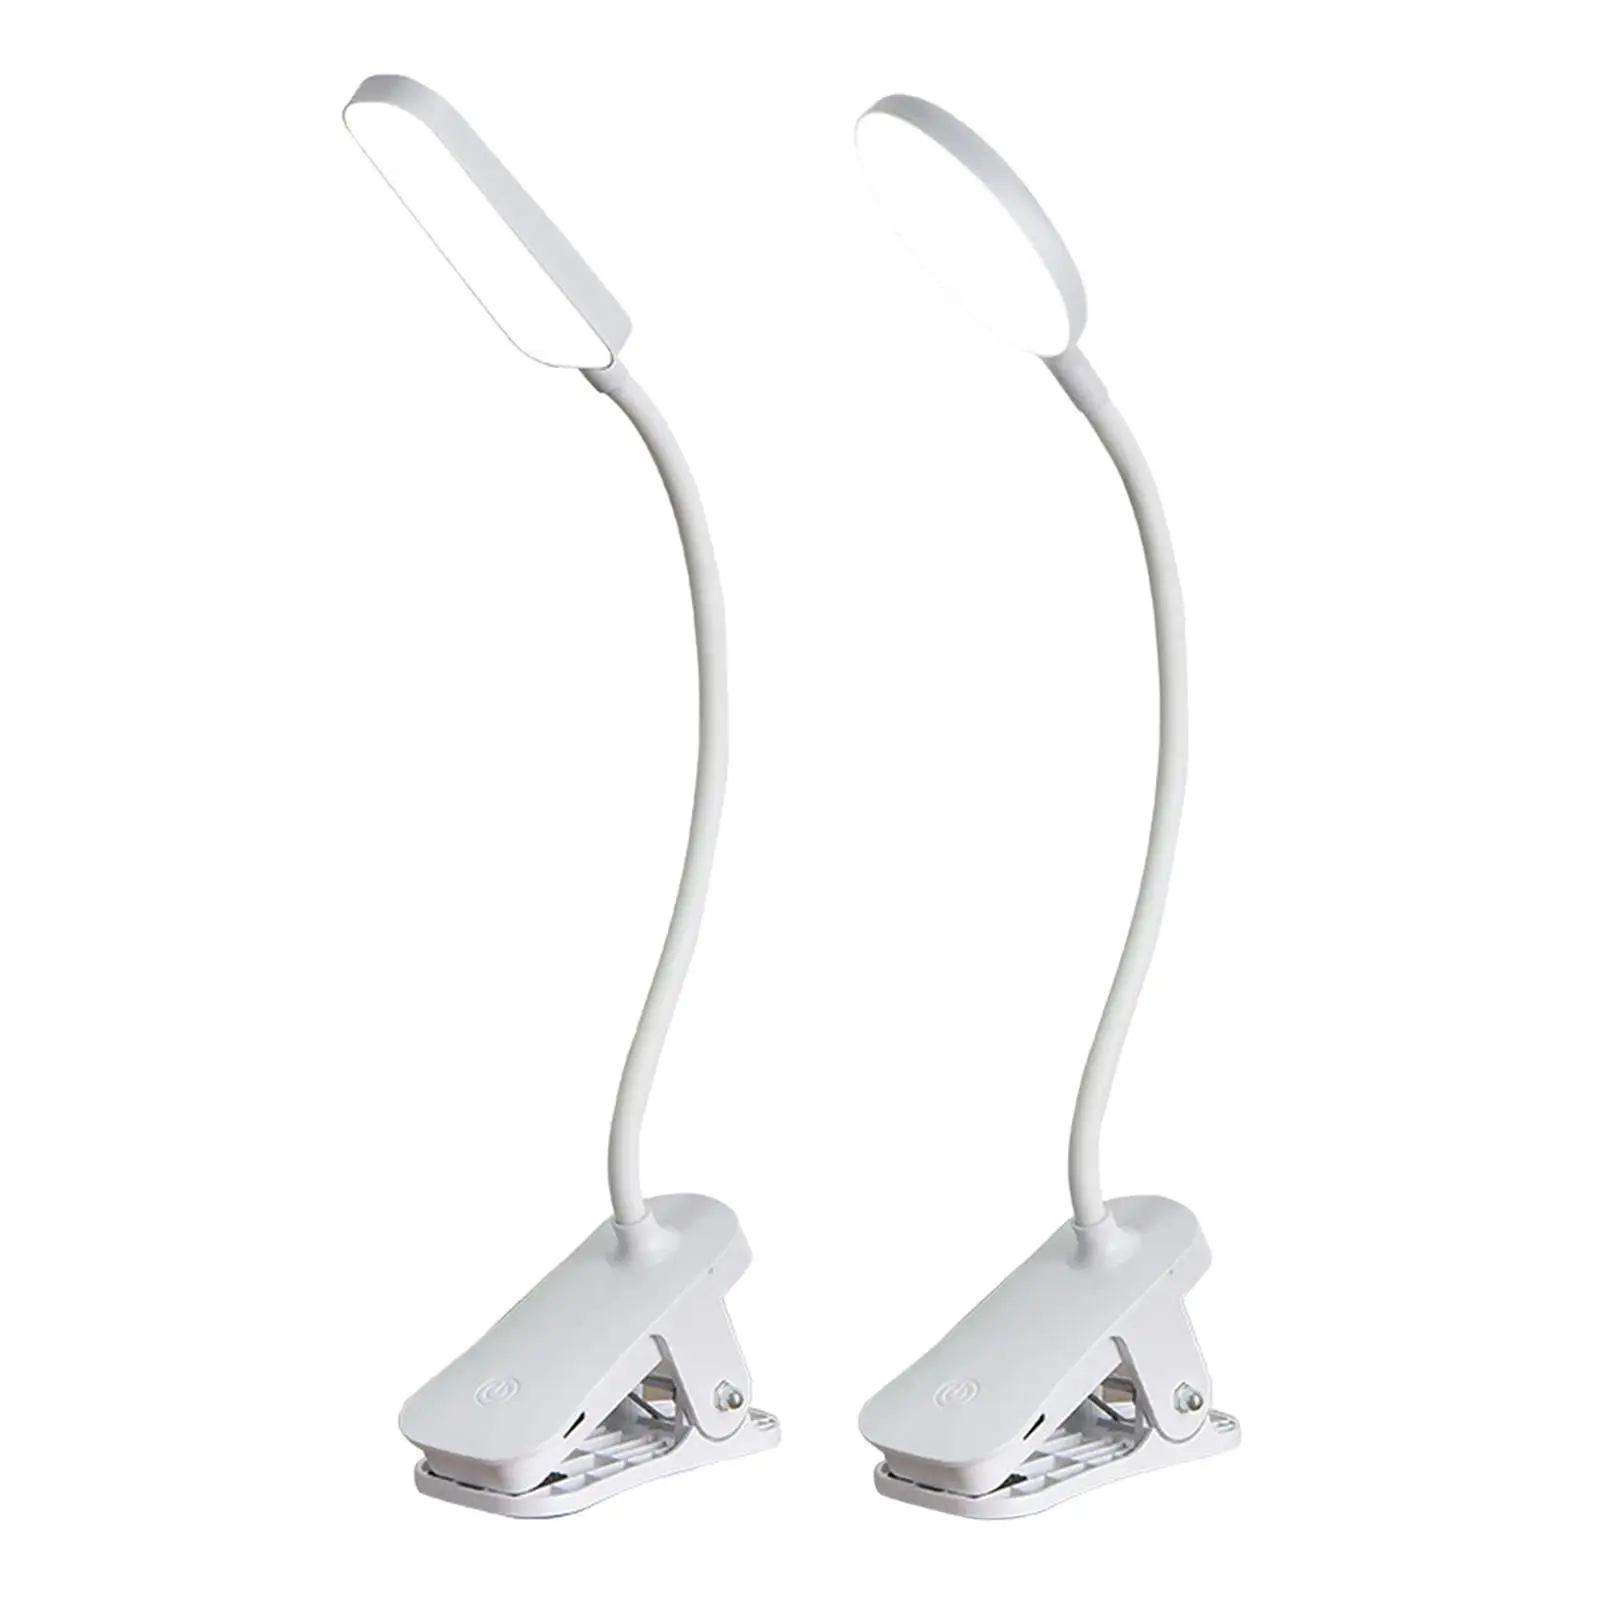 Flexible Arm LED Clip On Table Light Rechargeable Book Lights Eye Caring Table Clamp Lamp Nightlight for Bedside Piano Study